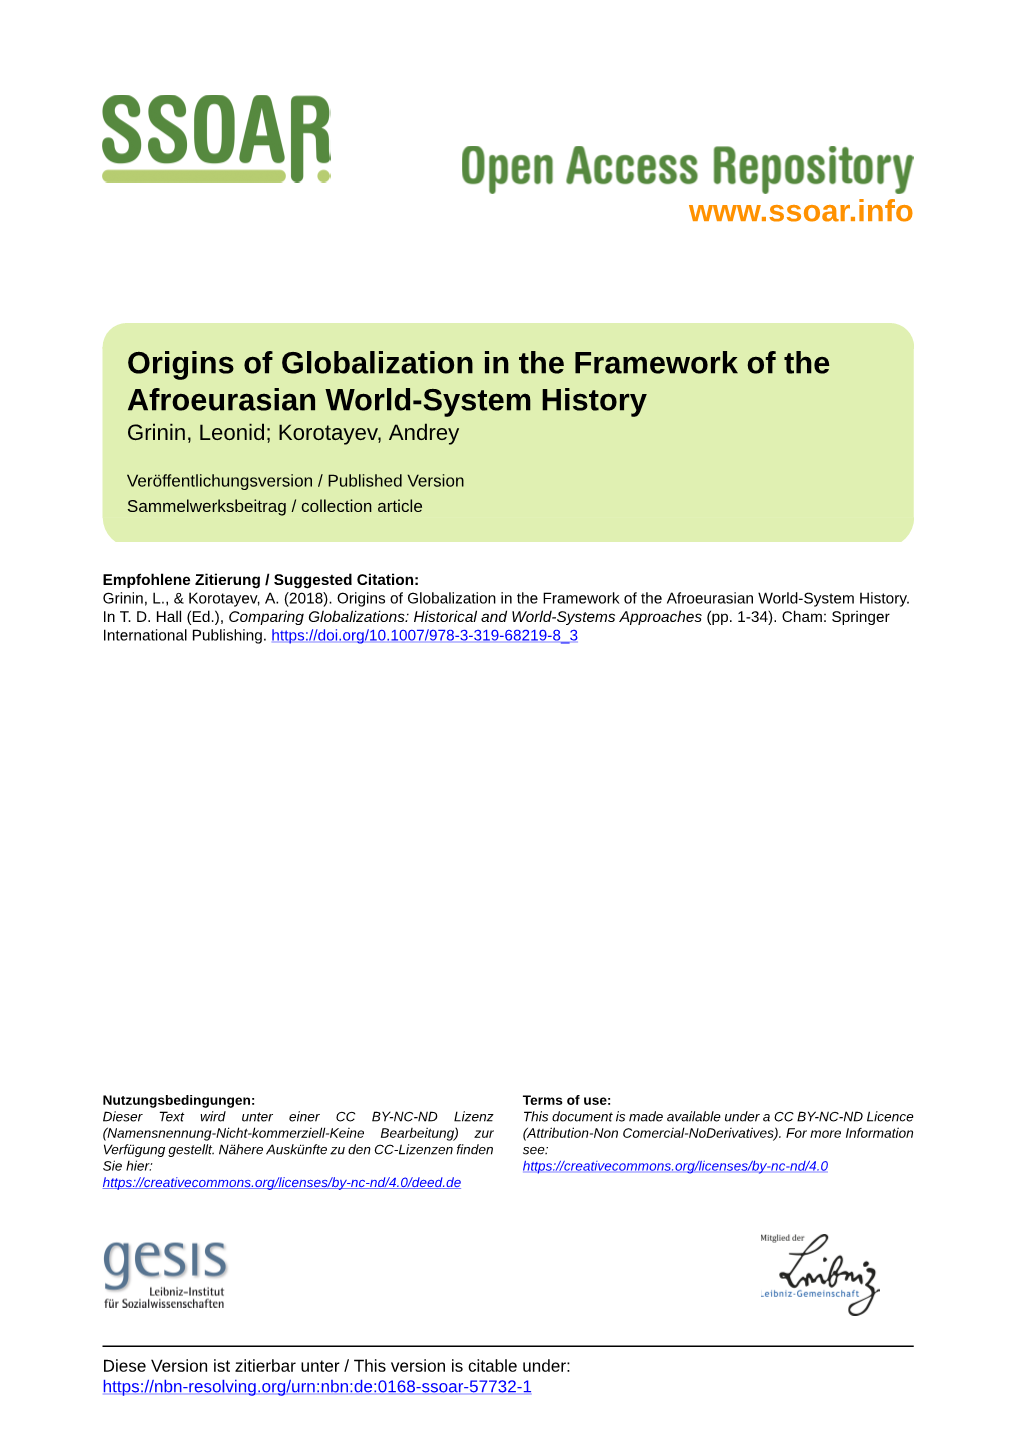 1987, 2004), Chase-Dunn and Hall (E.G., 1994, 1997, 2011), Kardulias (E.G., 2007) and Others Use the Term “World-System” Or “World-Systems”